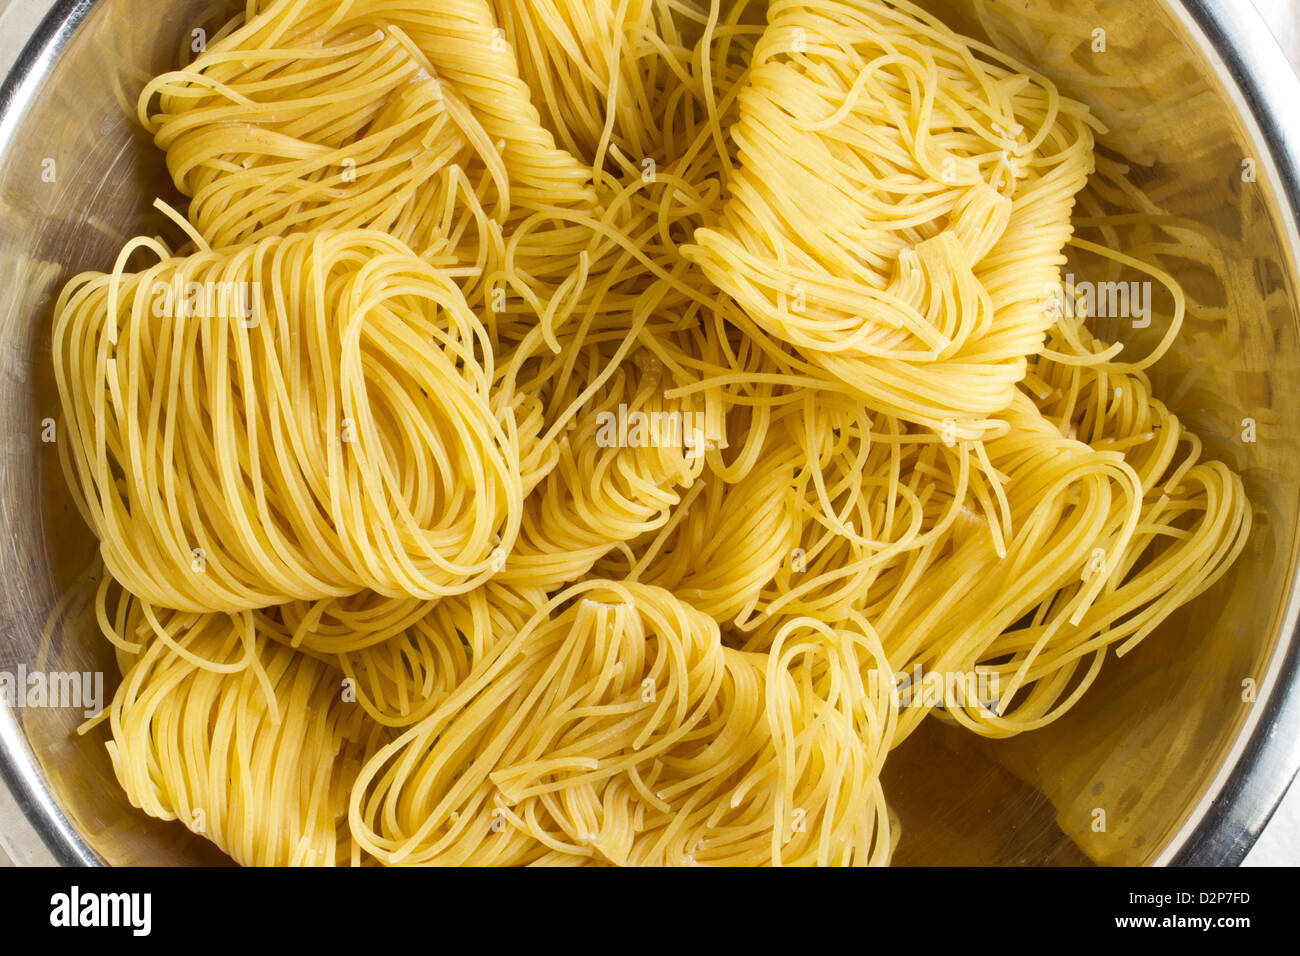 fideos, the traditional form of Spanish noodles Stock Photo